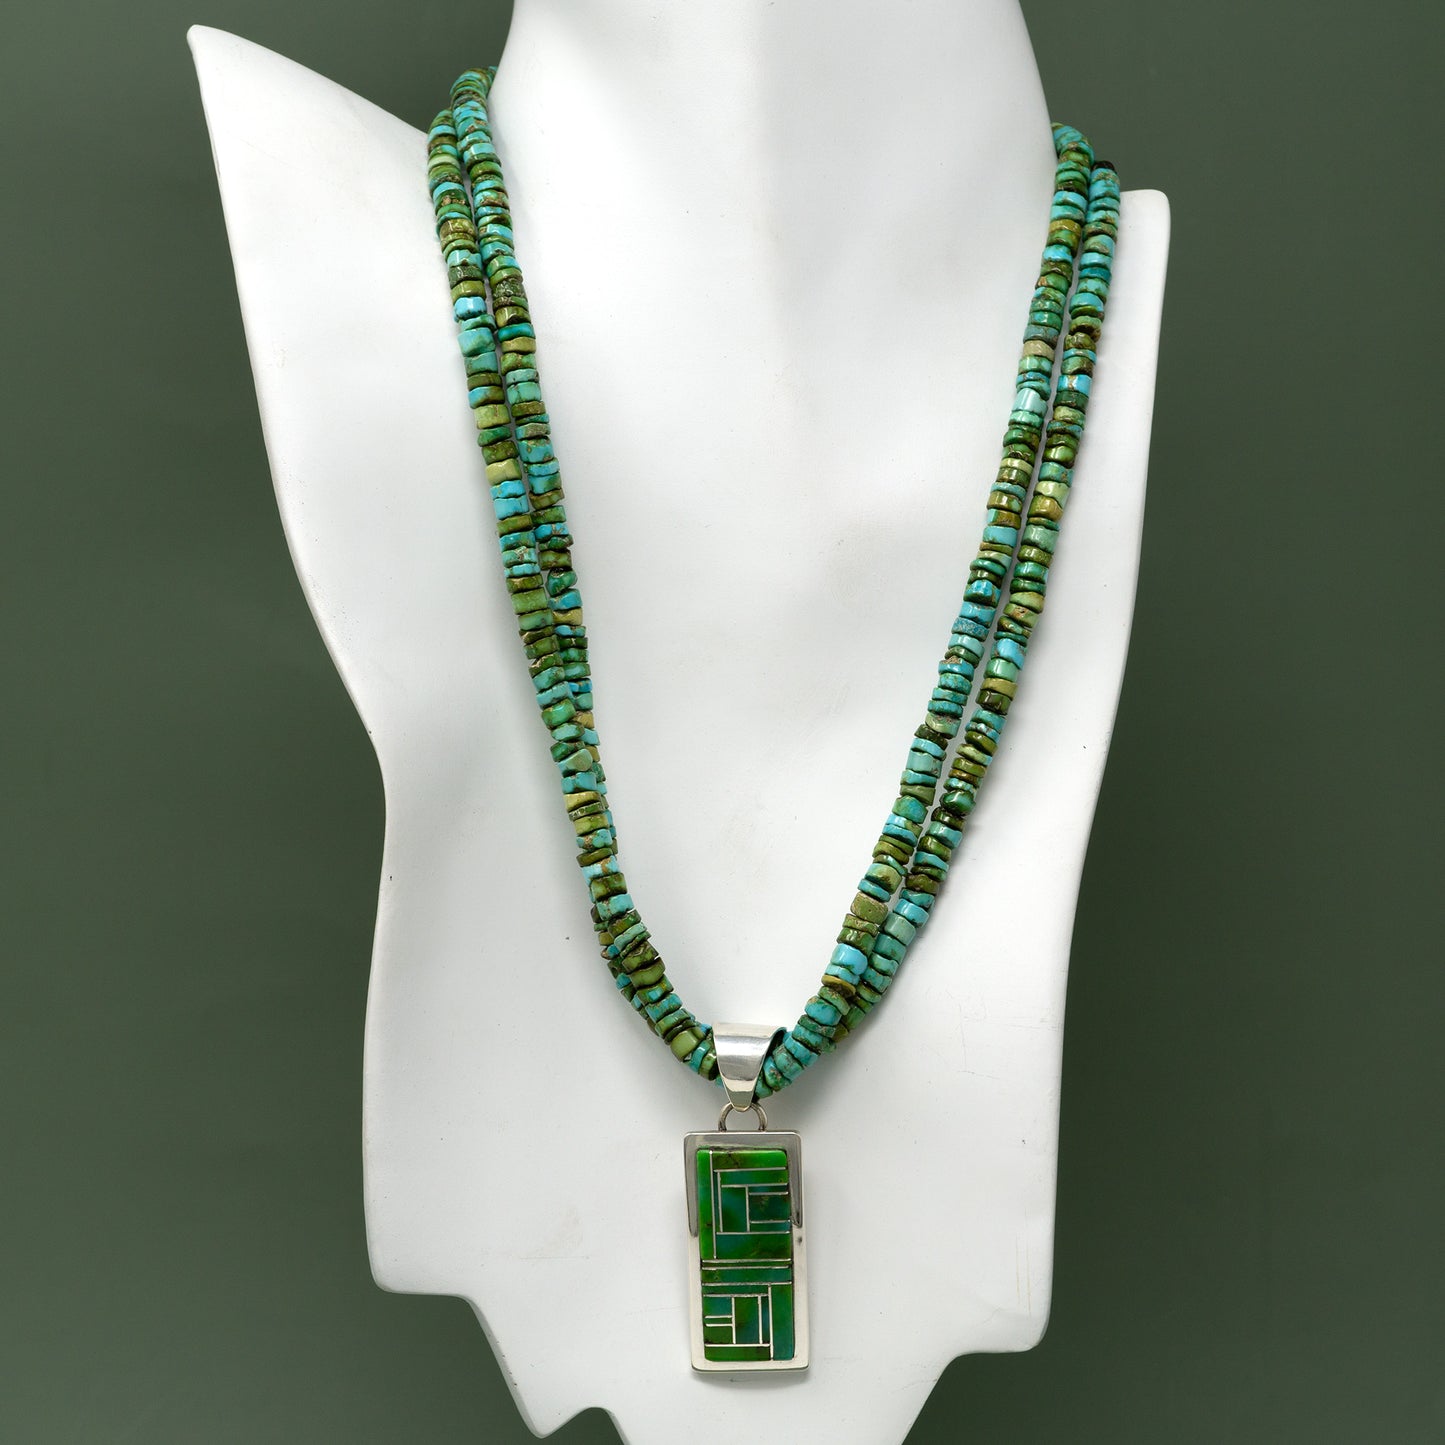 Sonoran Gold Beaded Necklace with Mosiac Lapidary Pendant | Tommy Jackson